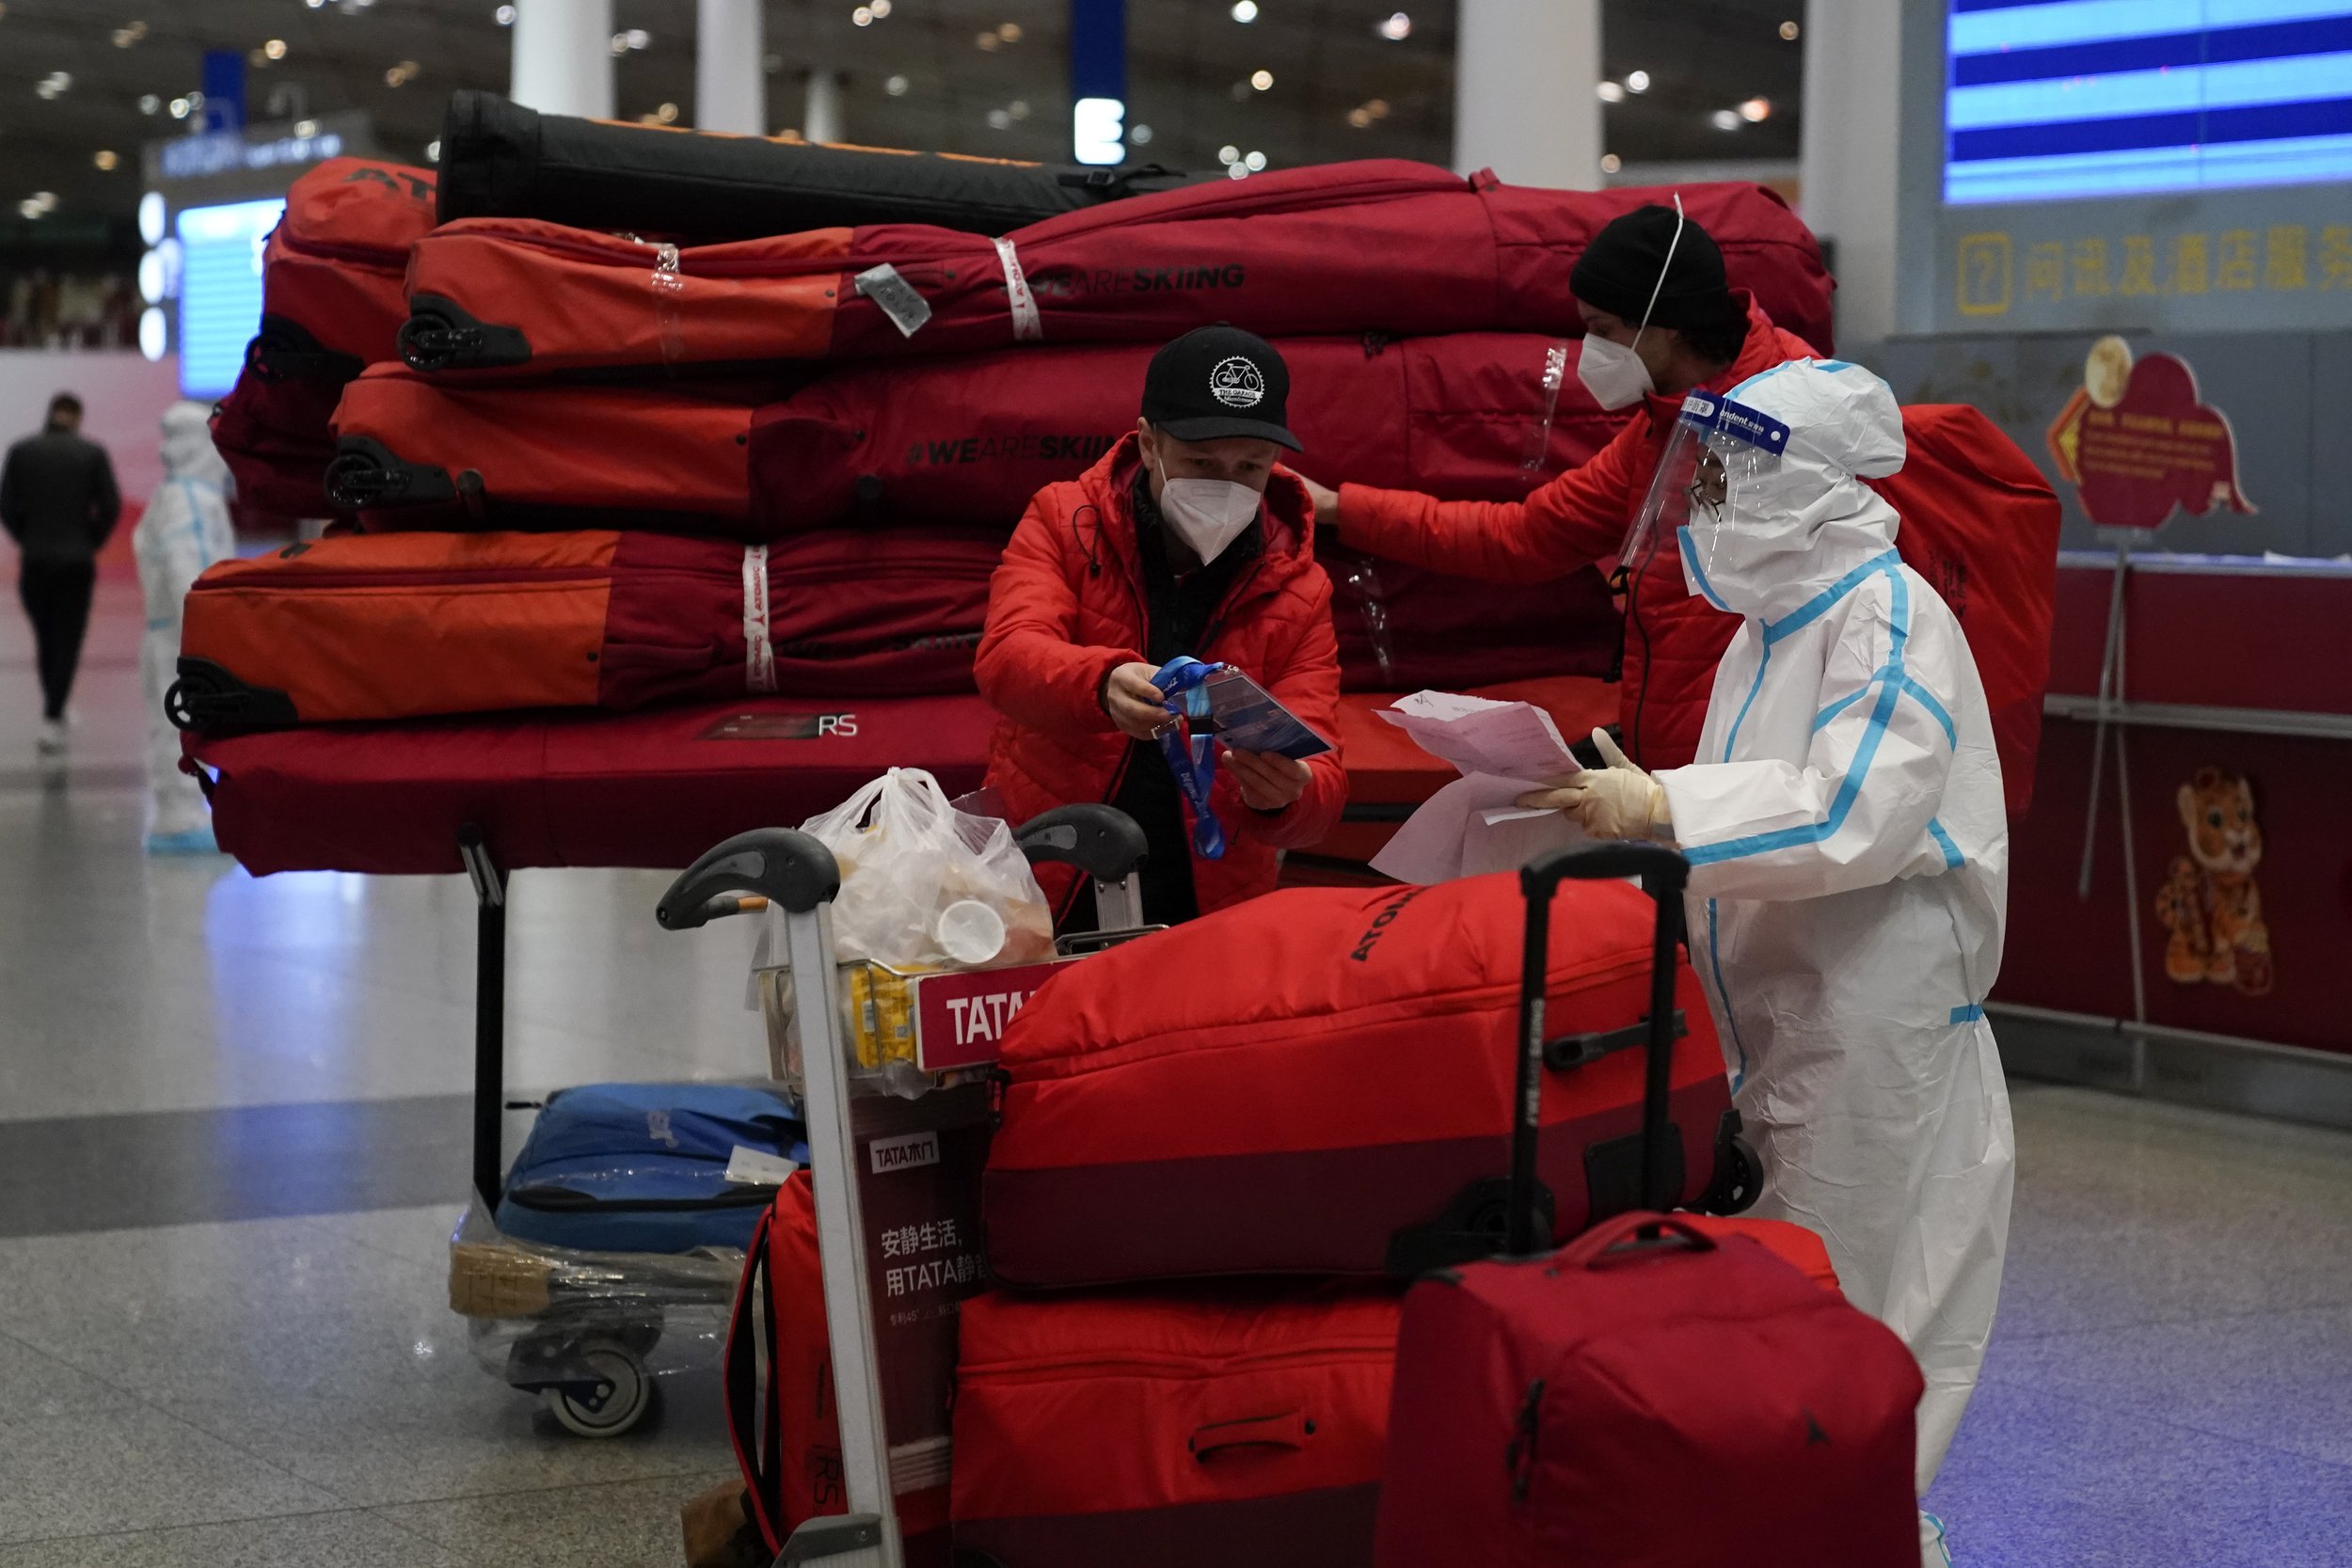  Passengers check their bags at the Beijing Capital International Airport after the conclusion of the 2022 Winter Olympics, Sunday, Feb. 20, 2022, in Beijing. (AP Photo/Ashley Landis) 